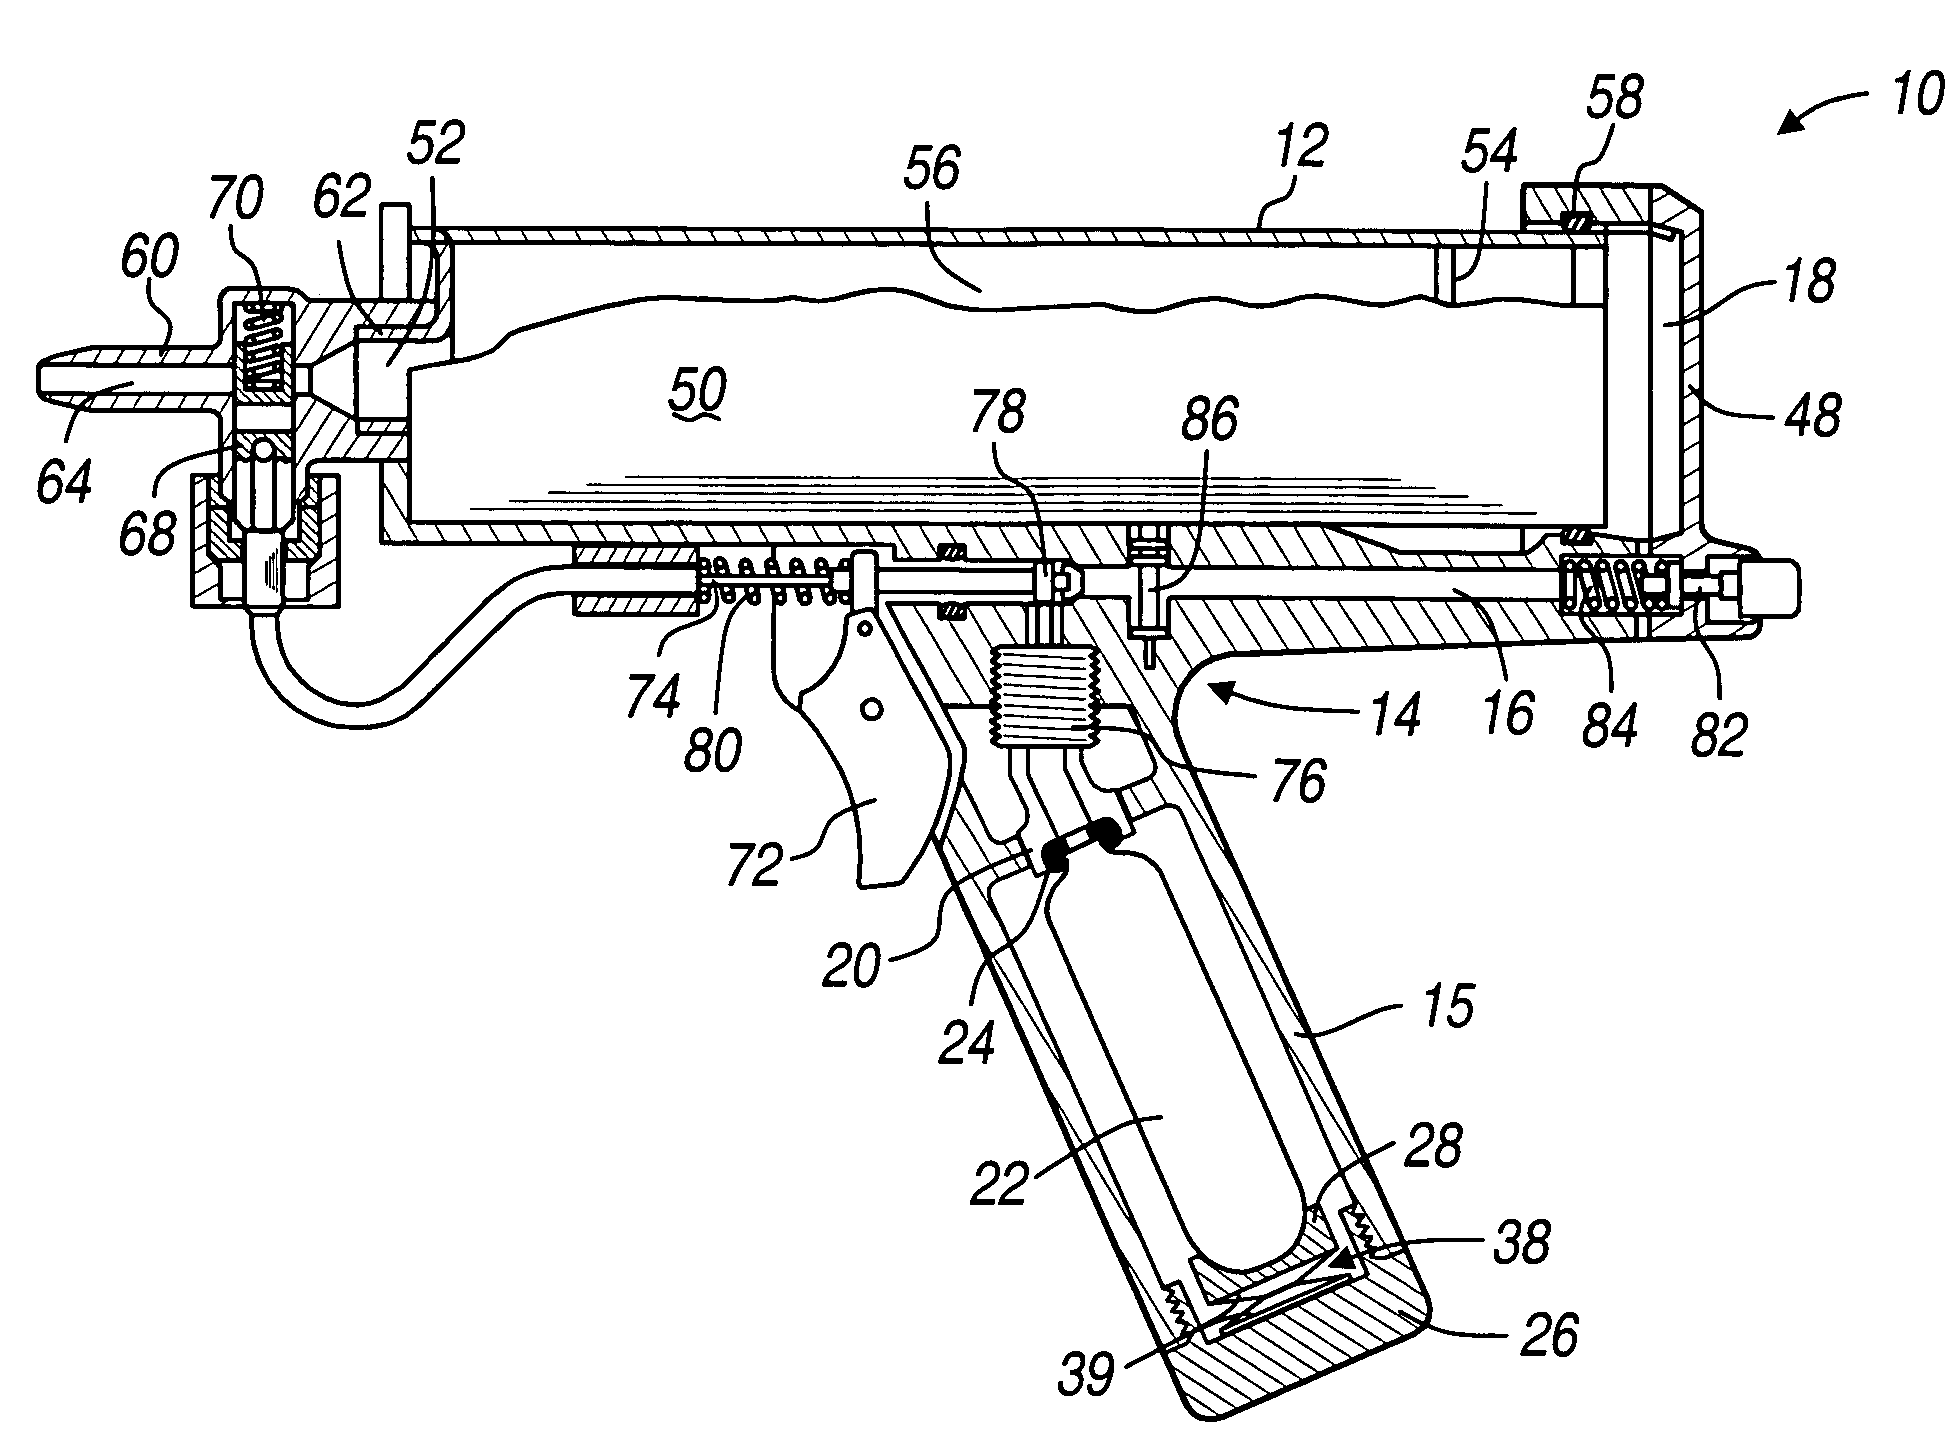 Pressure release connection and pneumatic dispensing device